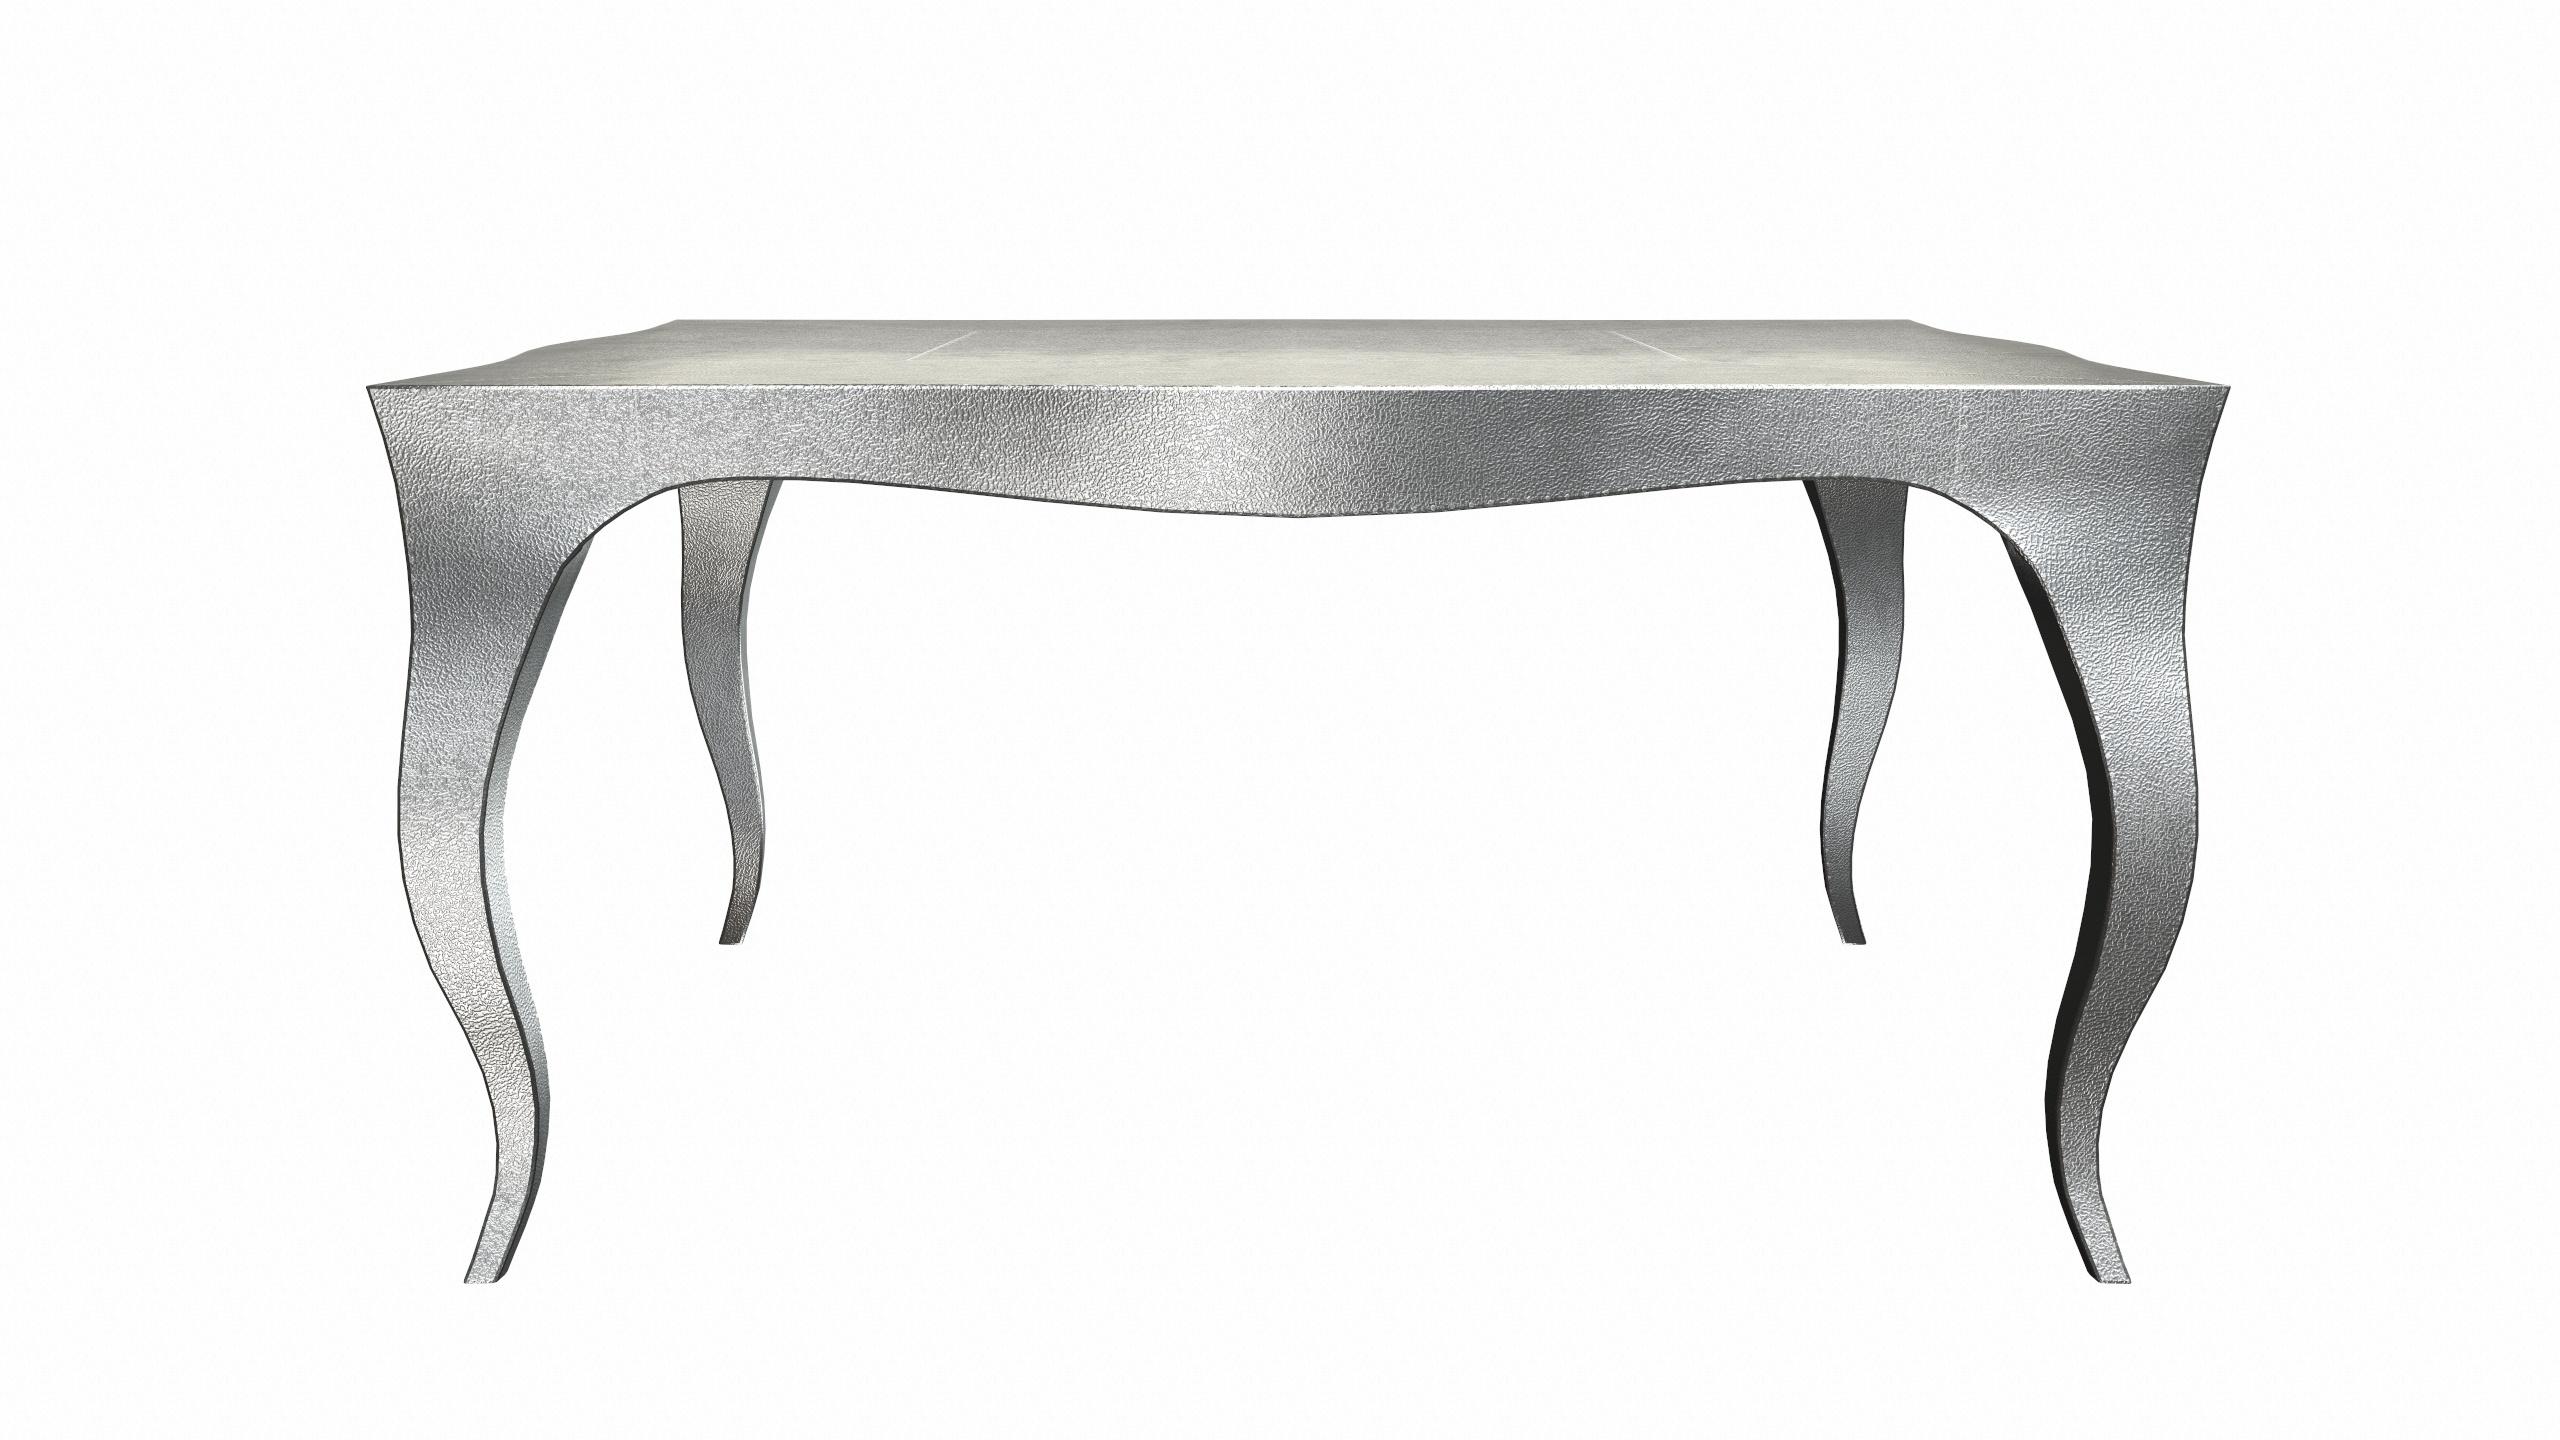 American  Louise Art Deco Game Tables Fine Hammered White Bronze 18.5x18.5x10 inch For Sale